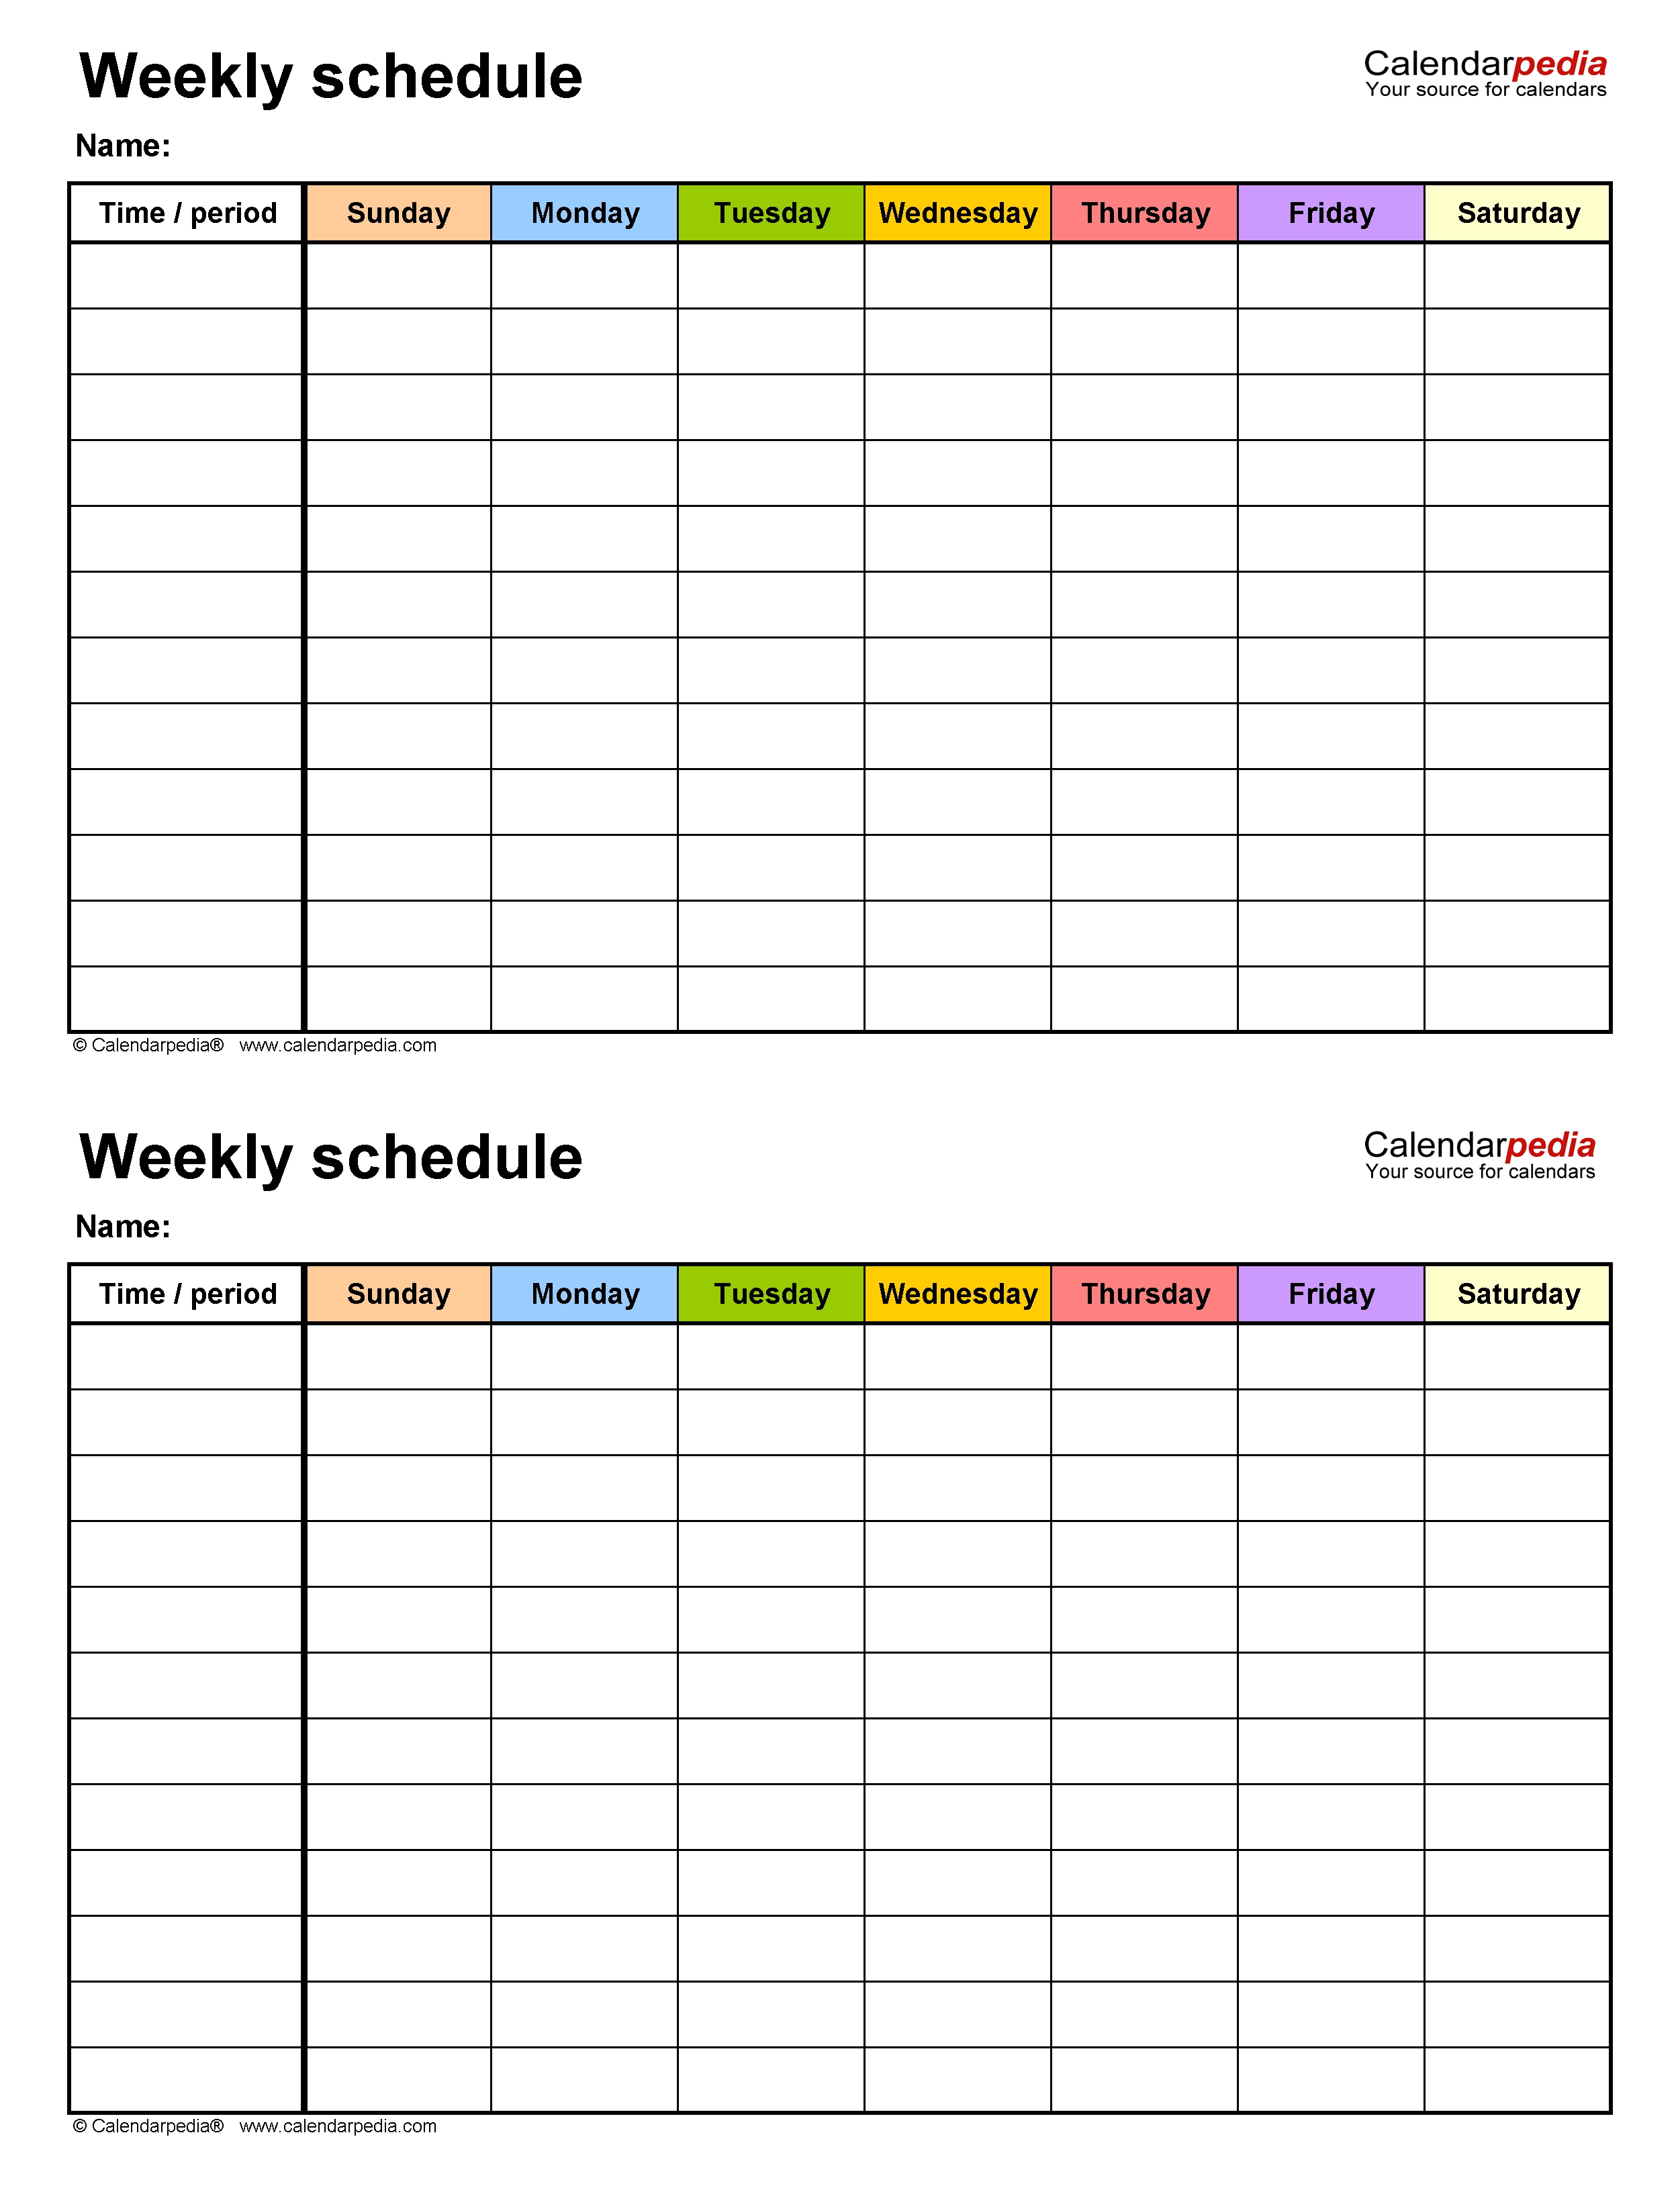 Free Weekly Schedule Templates For Pdf - 18 Templates with regard to Weekly Planner With Times Pdf